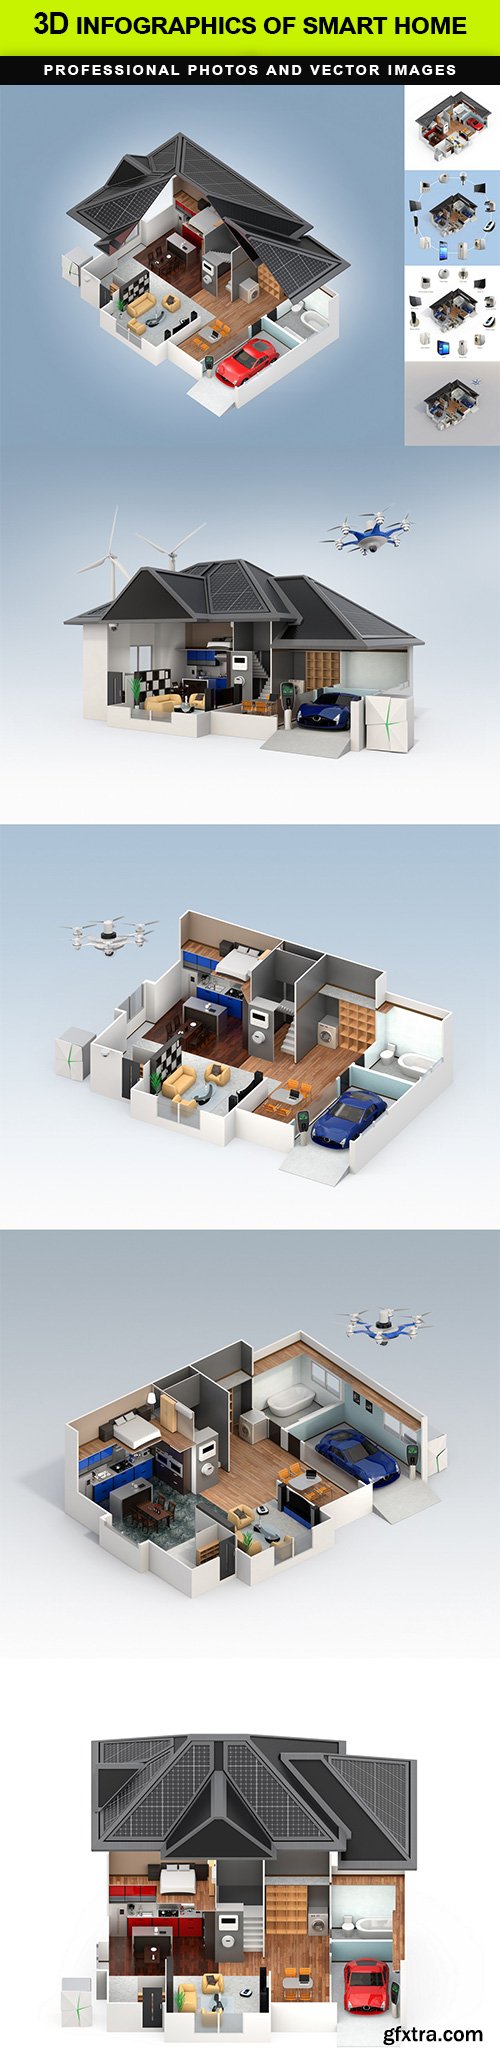 3D infographics of smart home